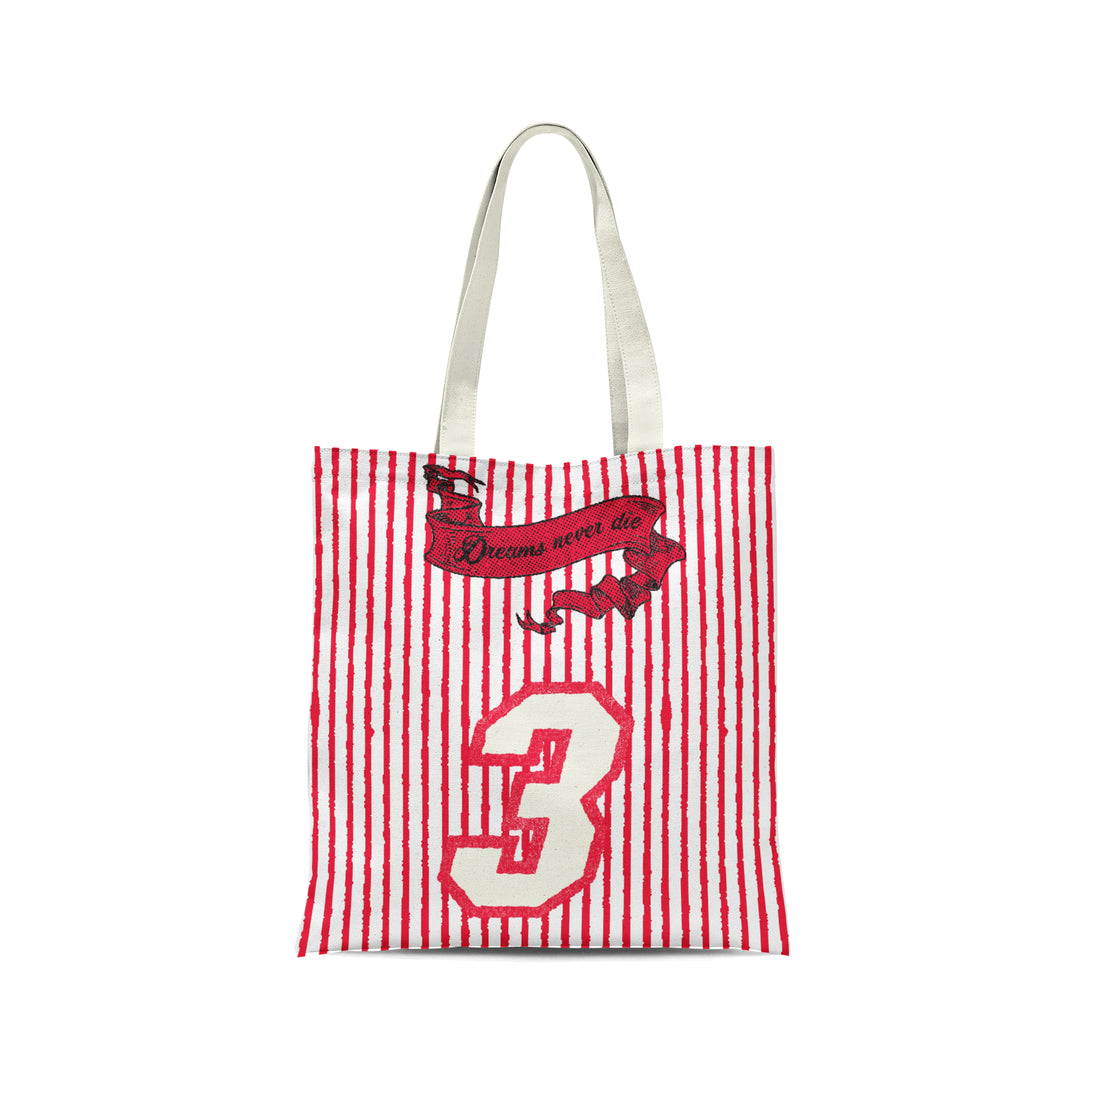 Tote Reaper Red on White